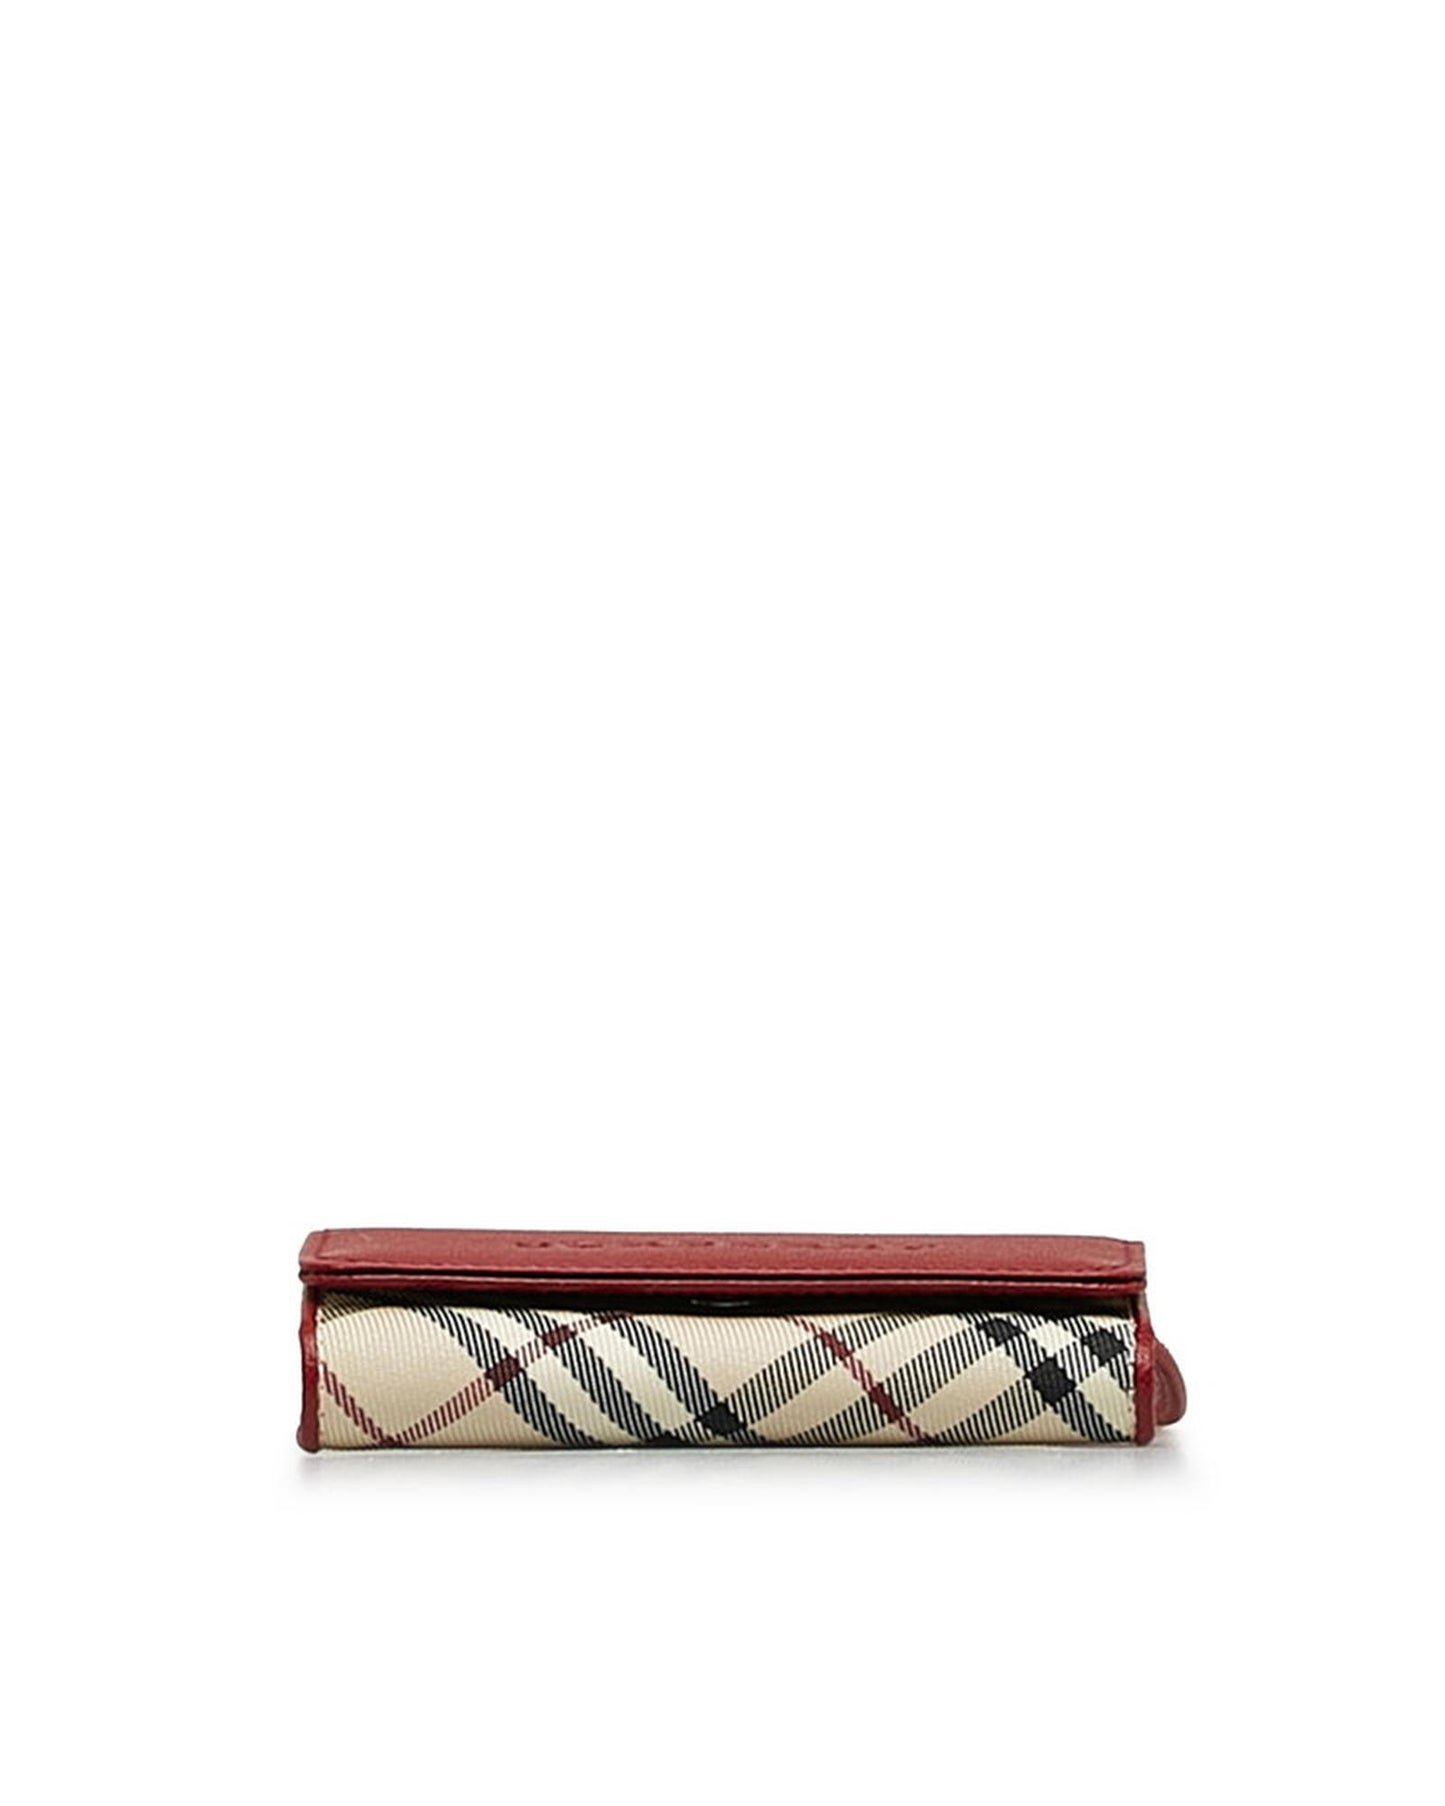 Burberry Women's Check Leather Key Case Wallet in Red